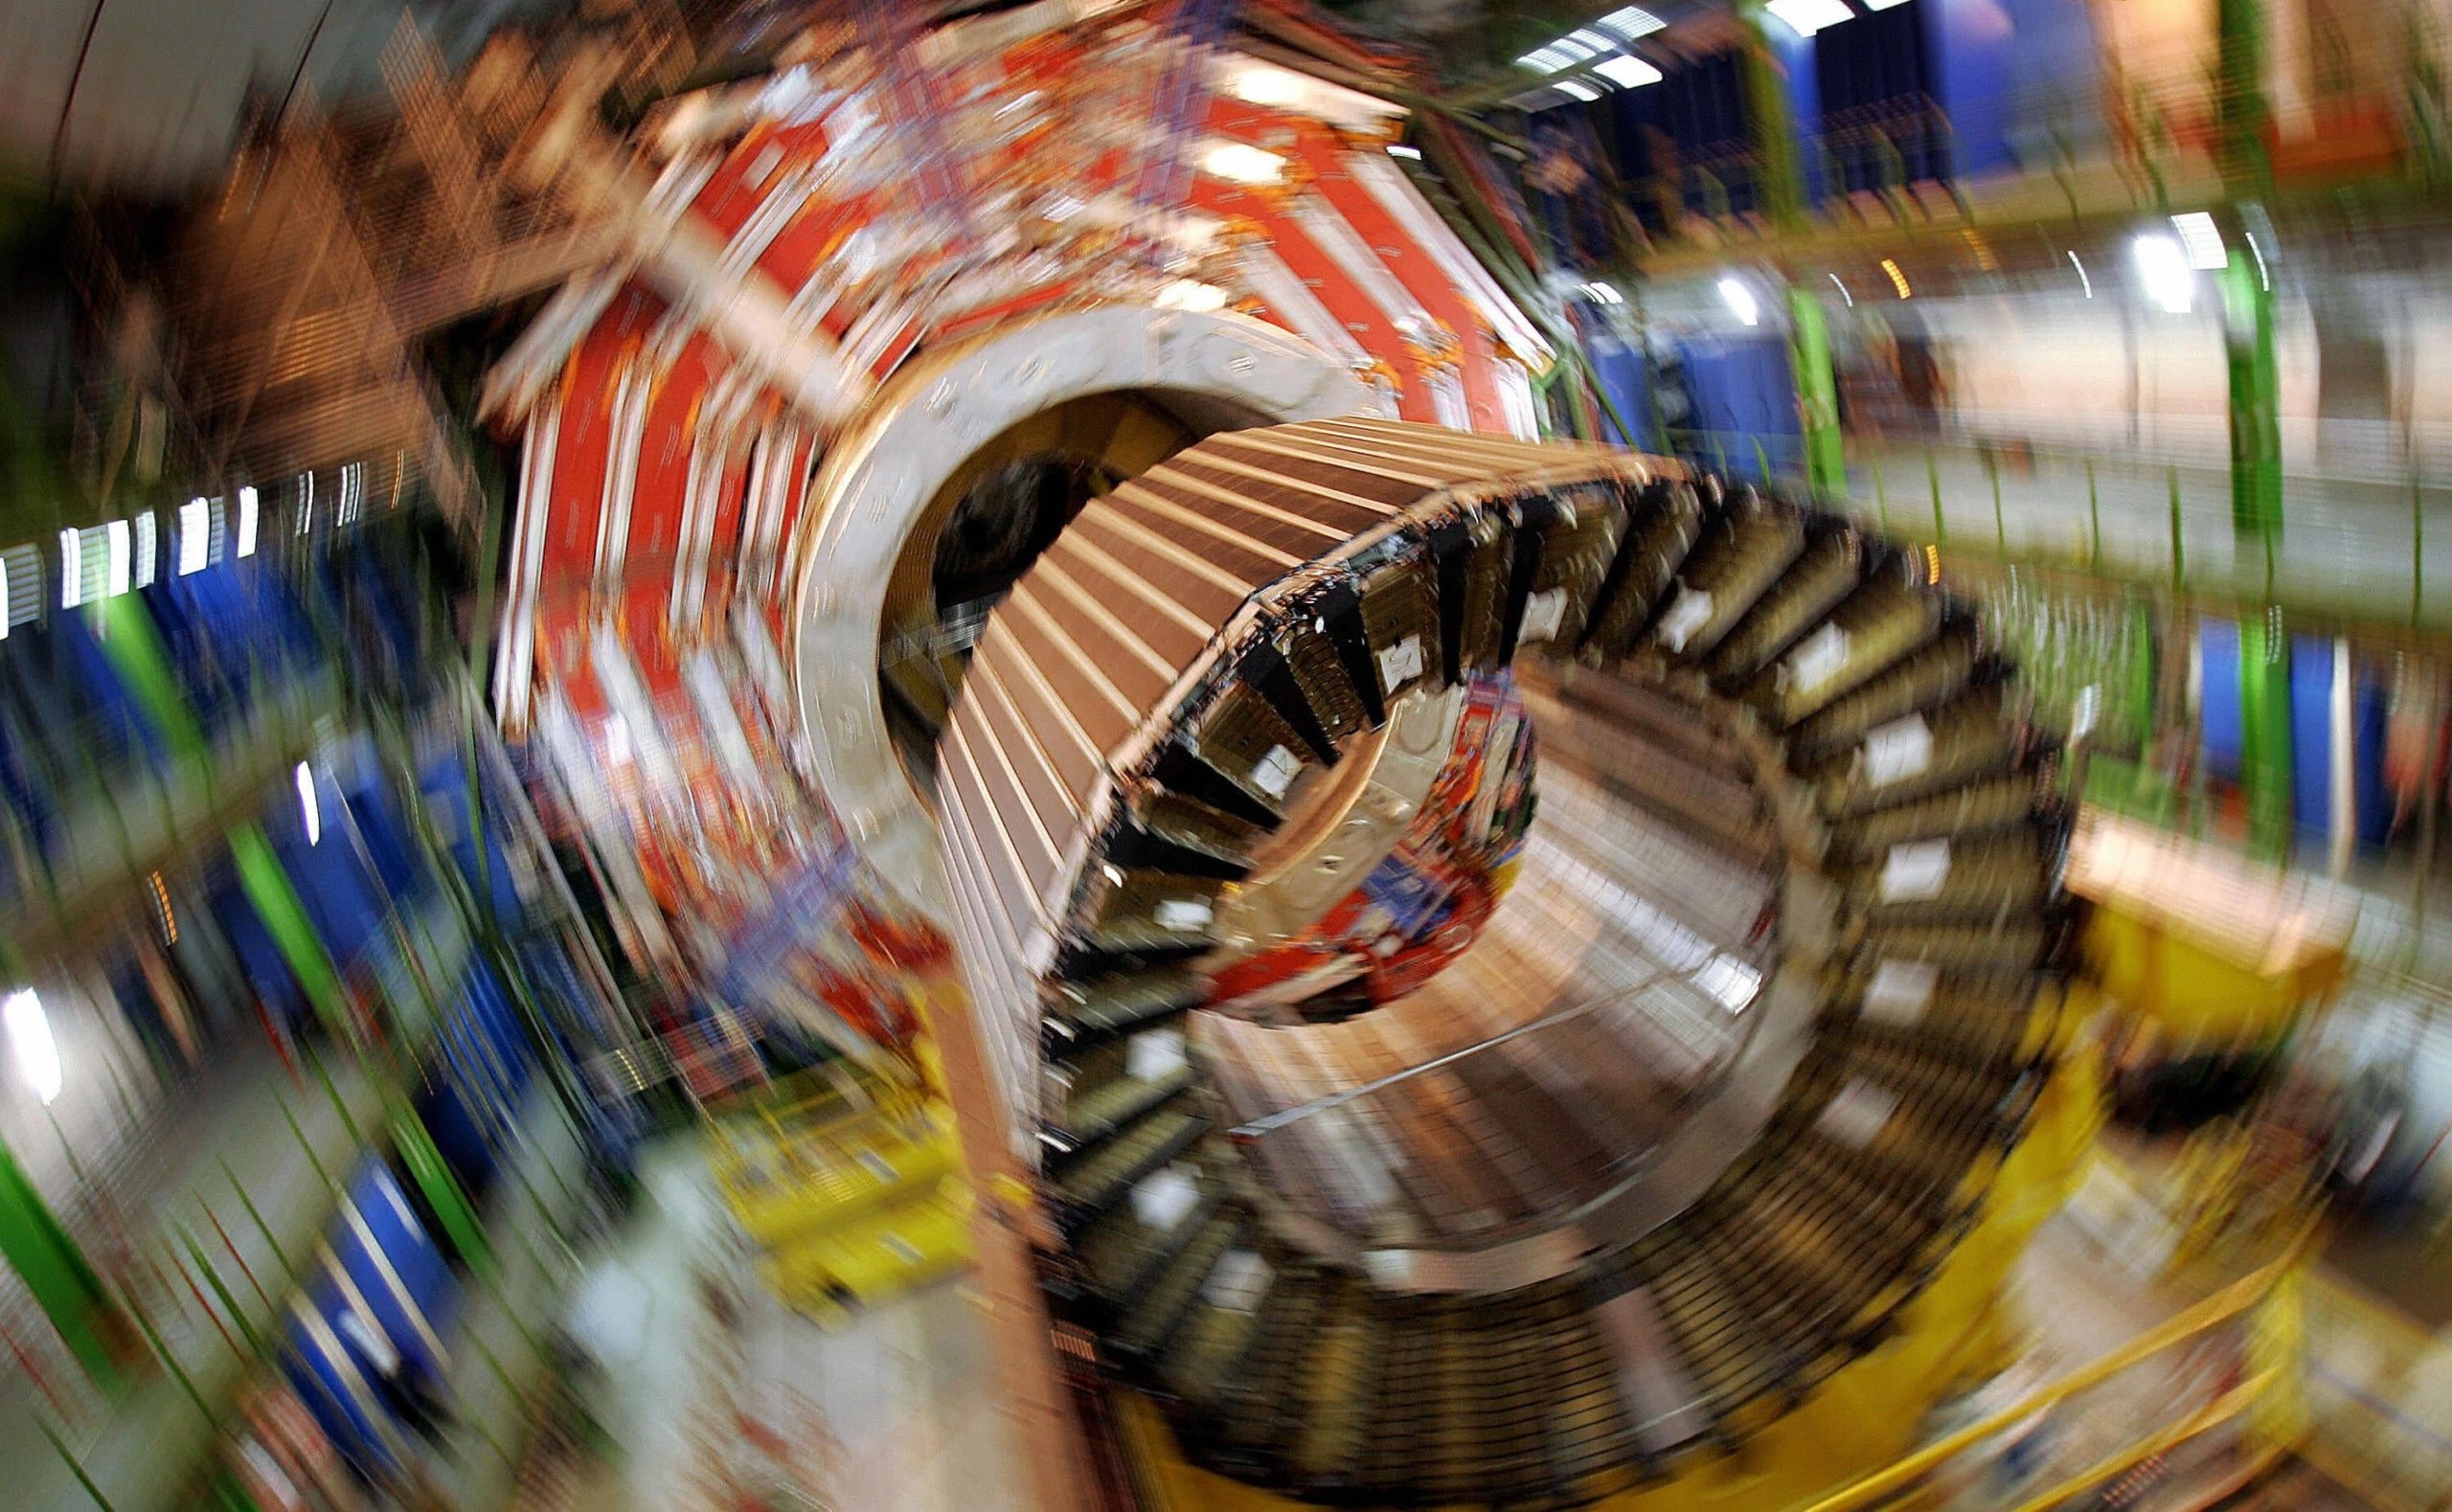 The magnet core of the Large Hadron Collider's Compact Muon Solenoid magnet in March 2007. (Photo: FABRICE COFFRINI/AFP, Getty Images)